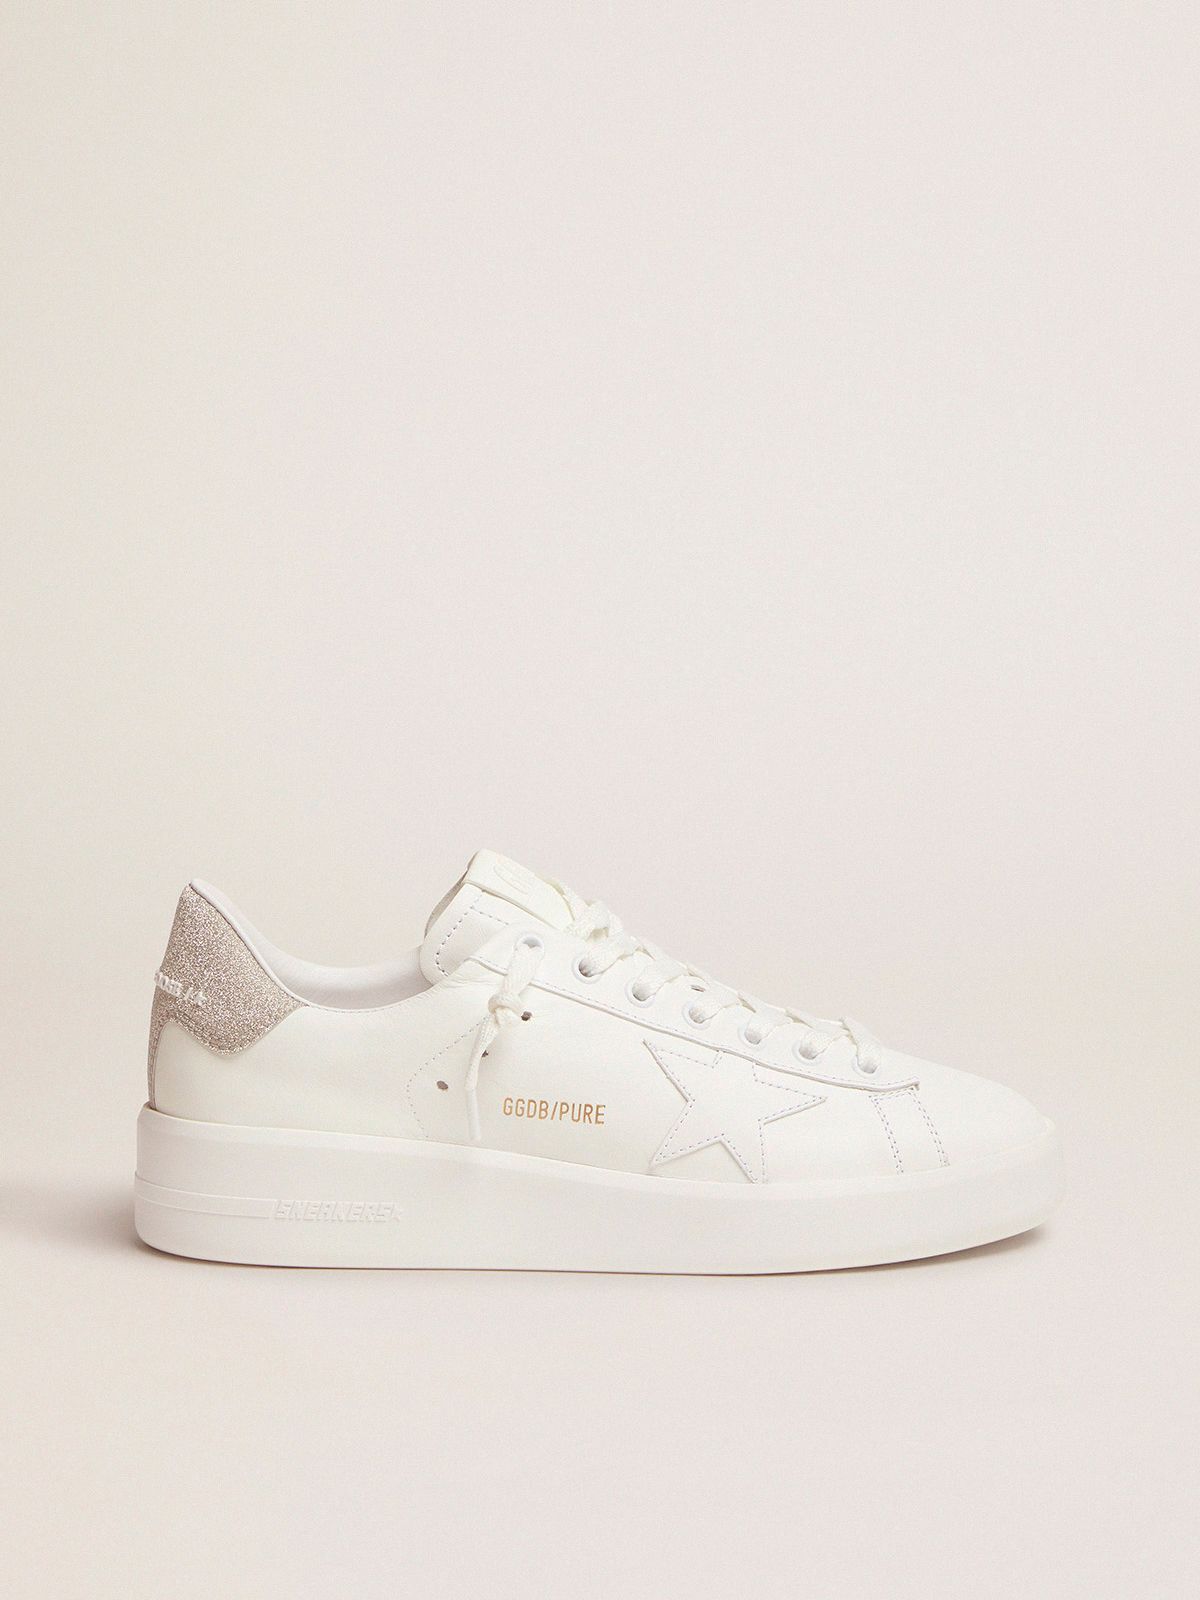 golden goose Purestar leather glitter with white tab heel in champagne sneakers